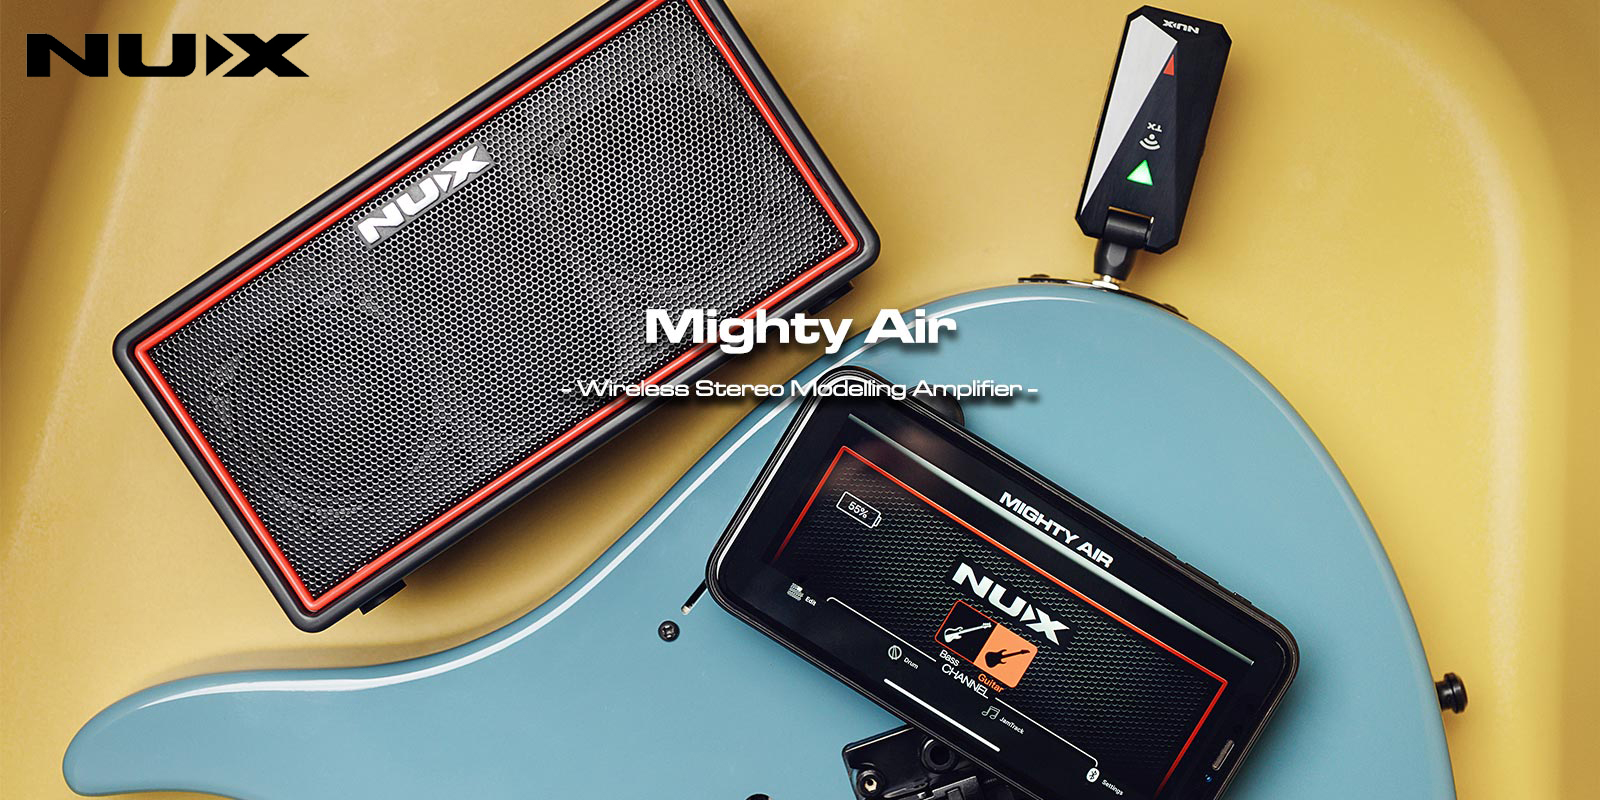 NUX Mighty Air Wireless Stereo Modeling Amplifier 【G'CLUB TOKYO】